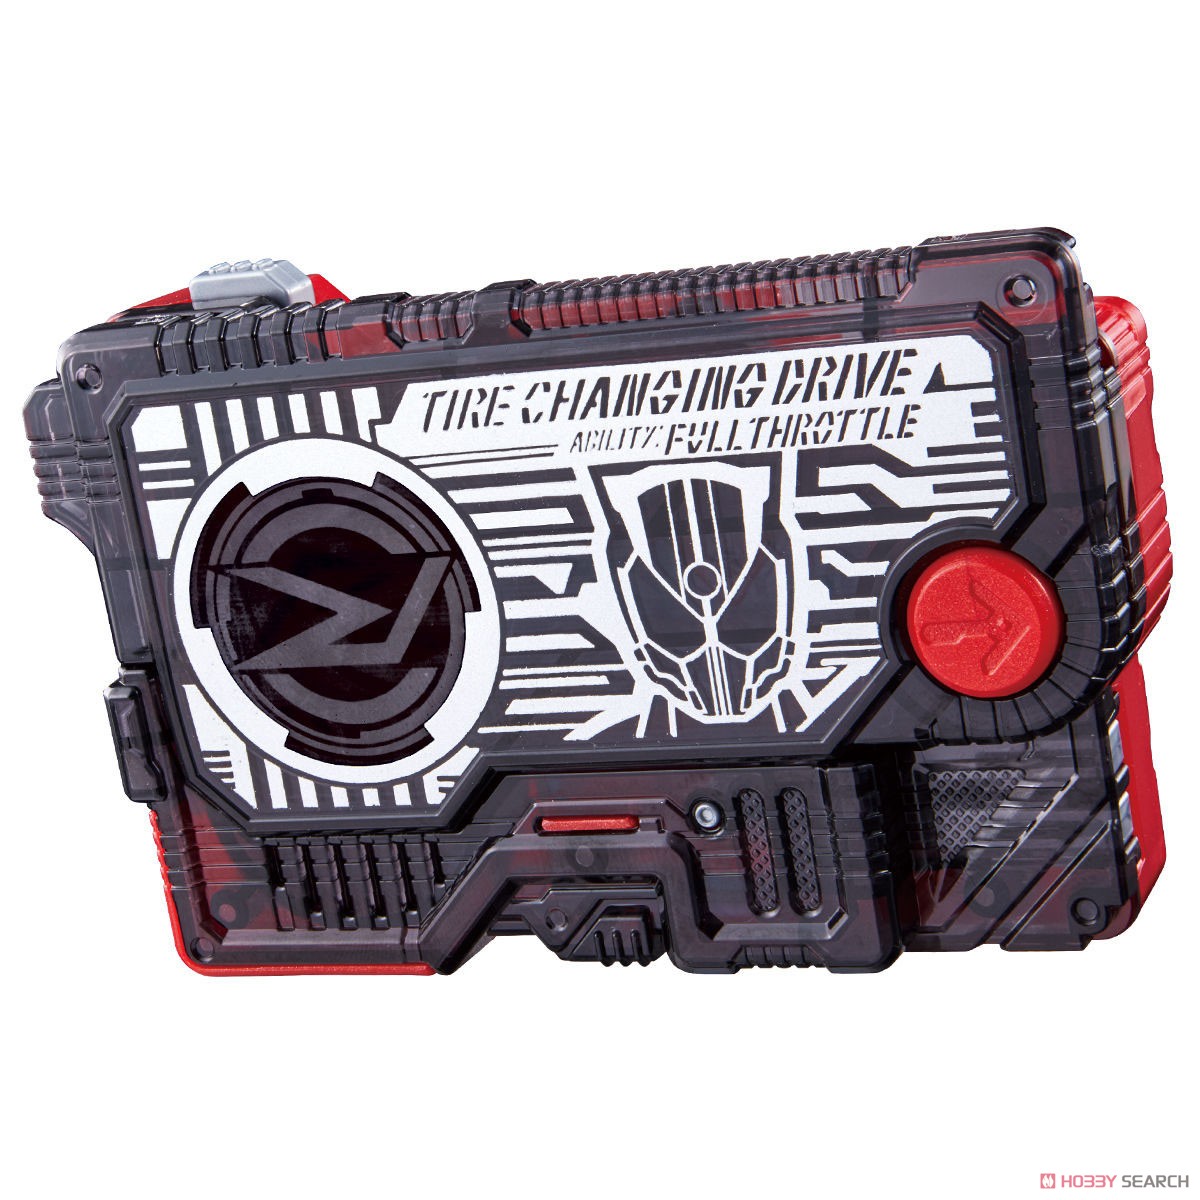 DX Tire Changing Drive Progrise Key (Henshin Dress-up) Item picture1